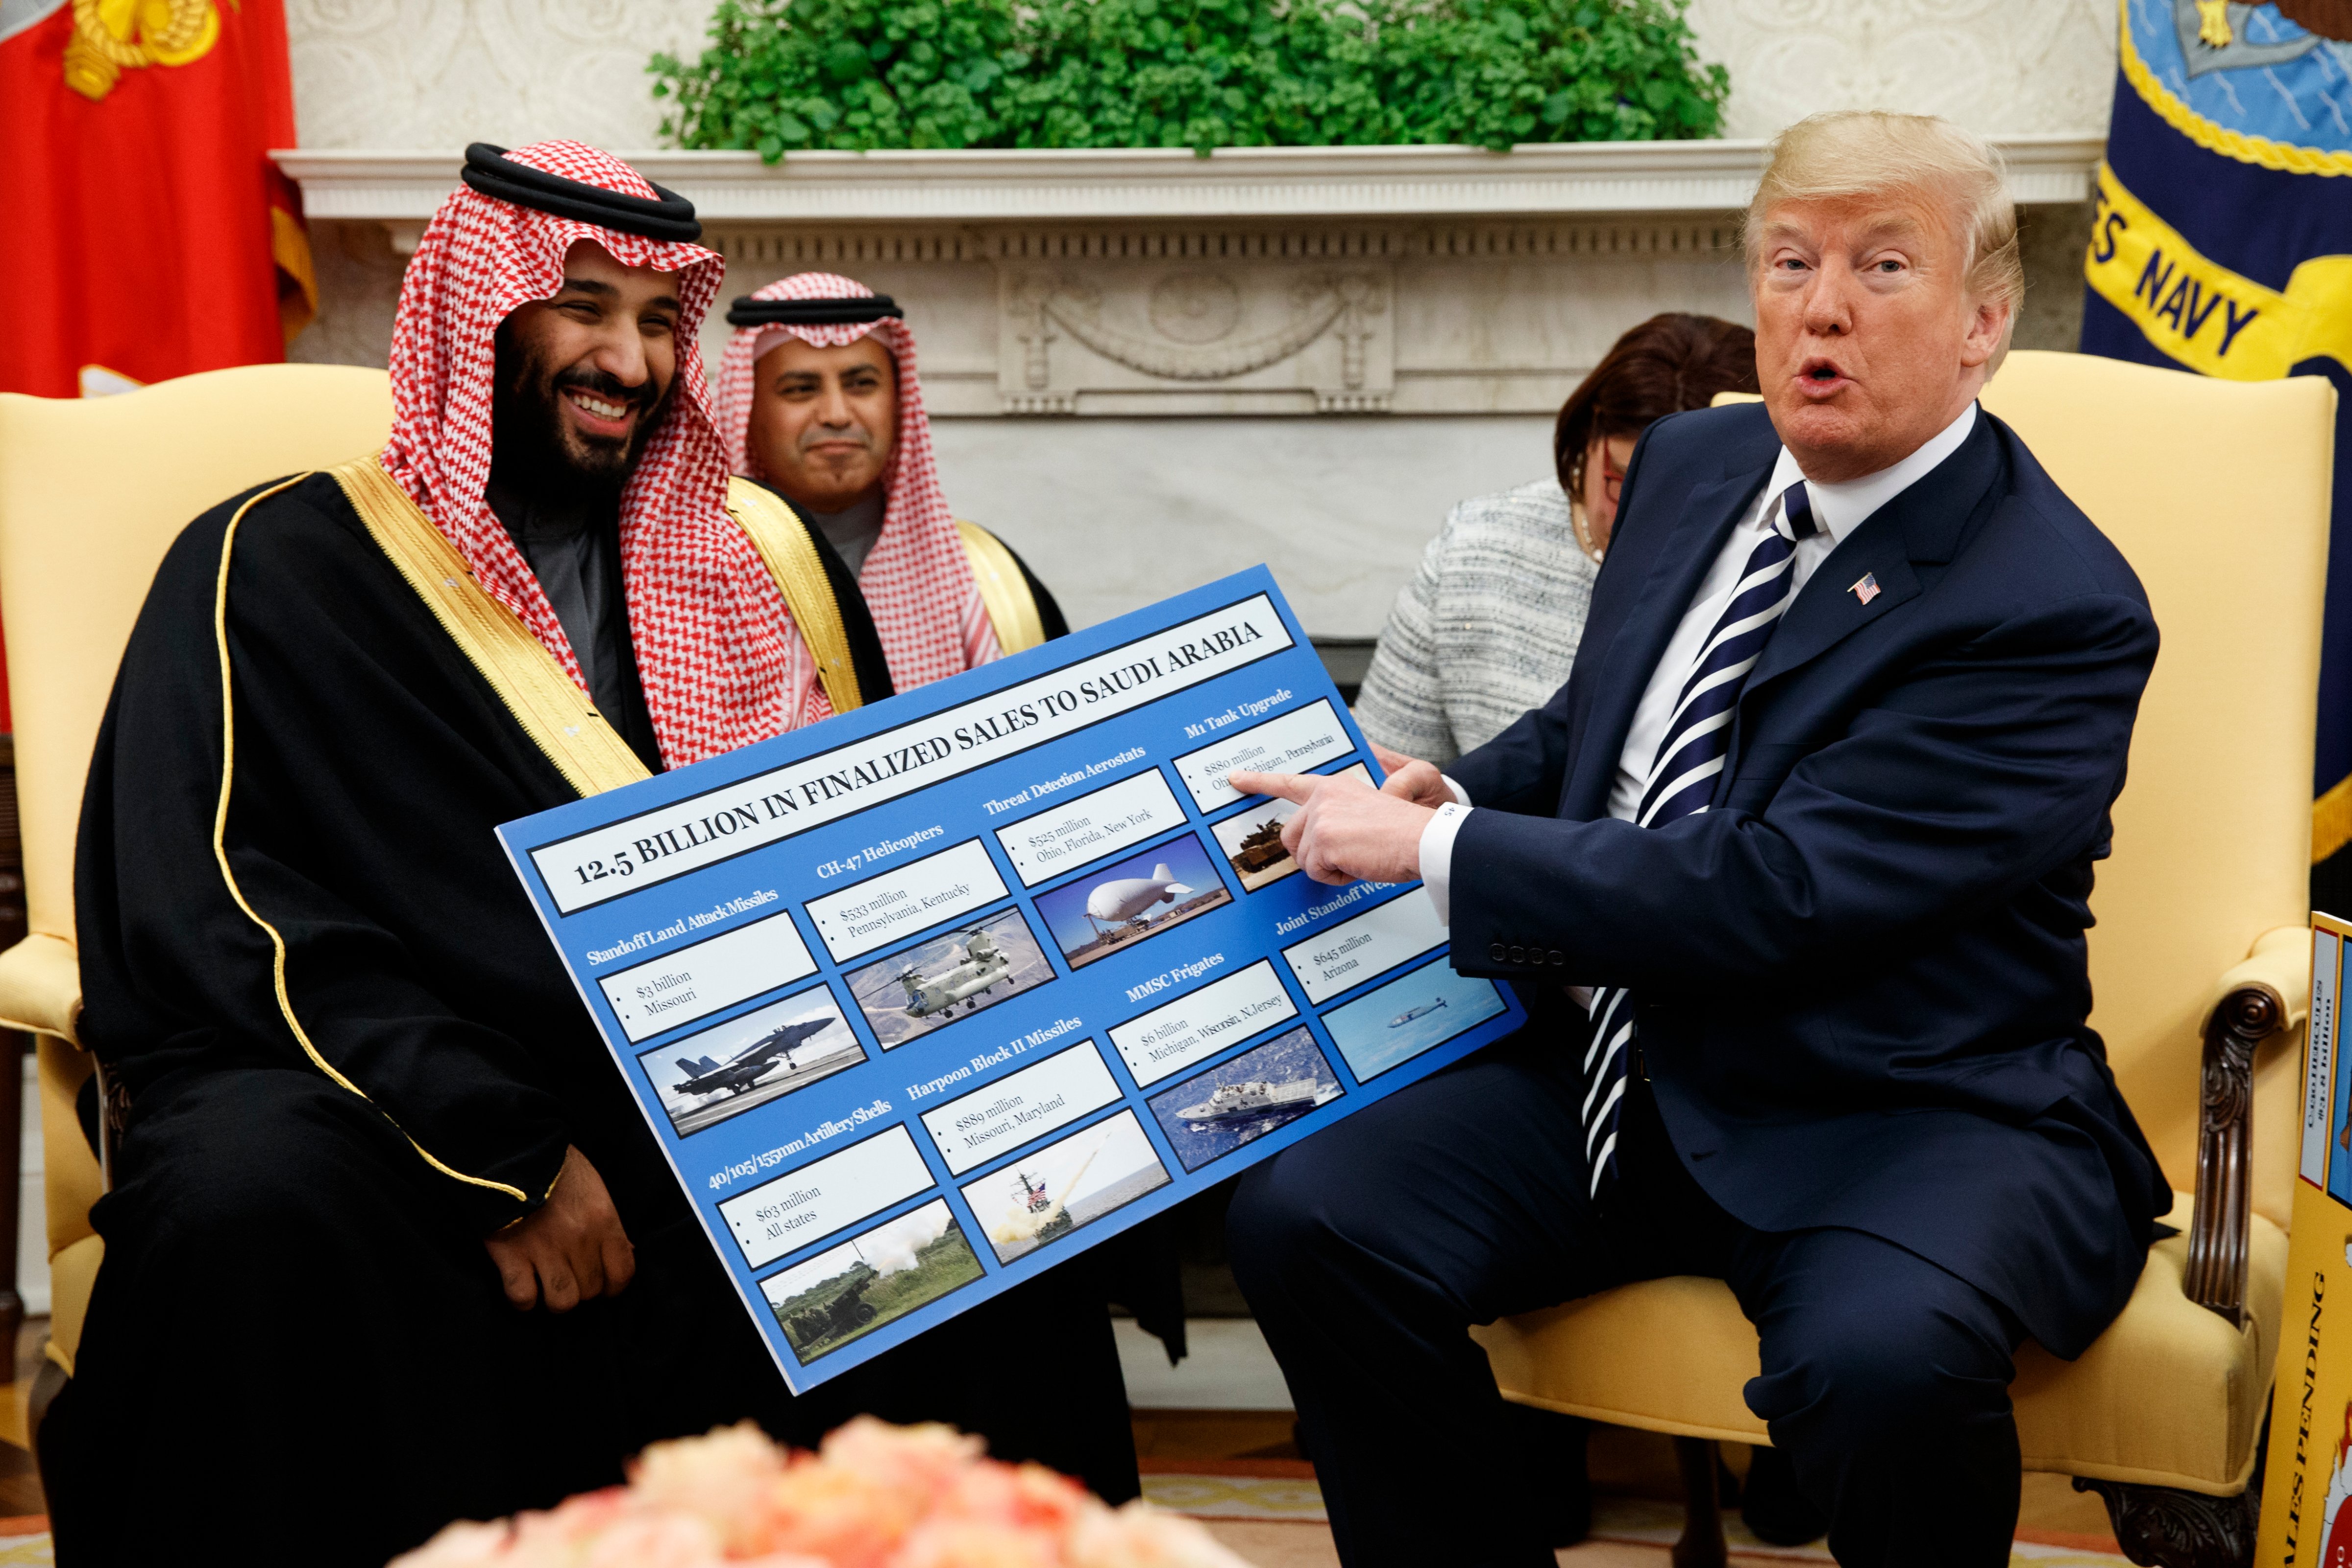 President Donald Trump shows a chart highlighting arms sales to Saudi Arabia during a meeting with Saudi Crown Prince Mohammed bin Salman in the Oval Office of the White House in Washington on  March 20, 2018. (Evan Vucci&mdash;AP)